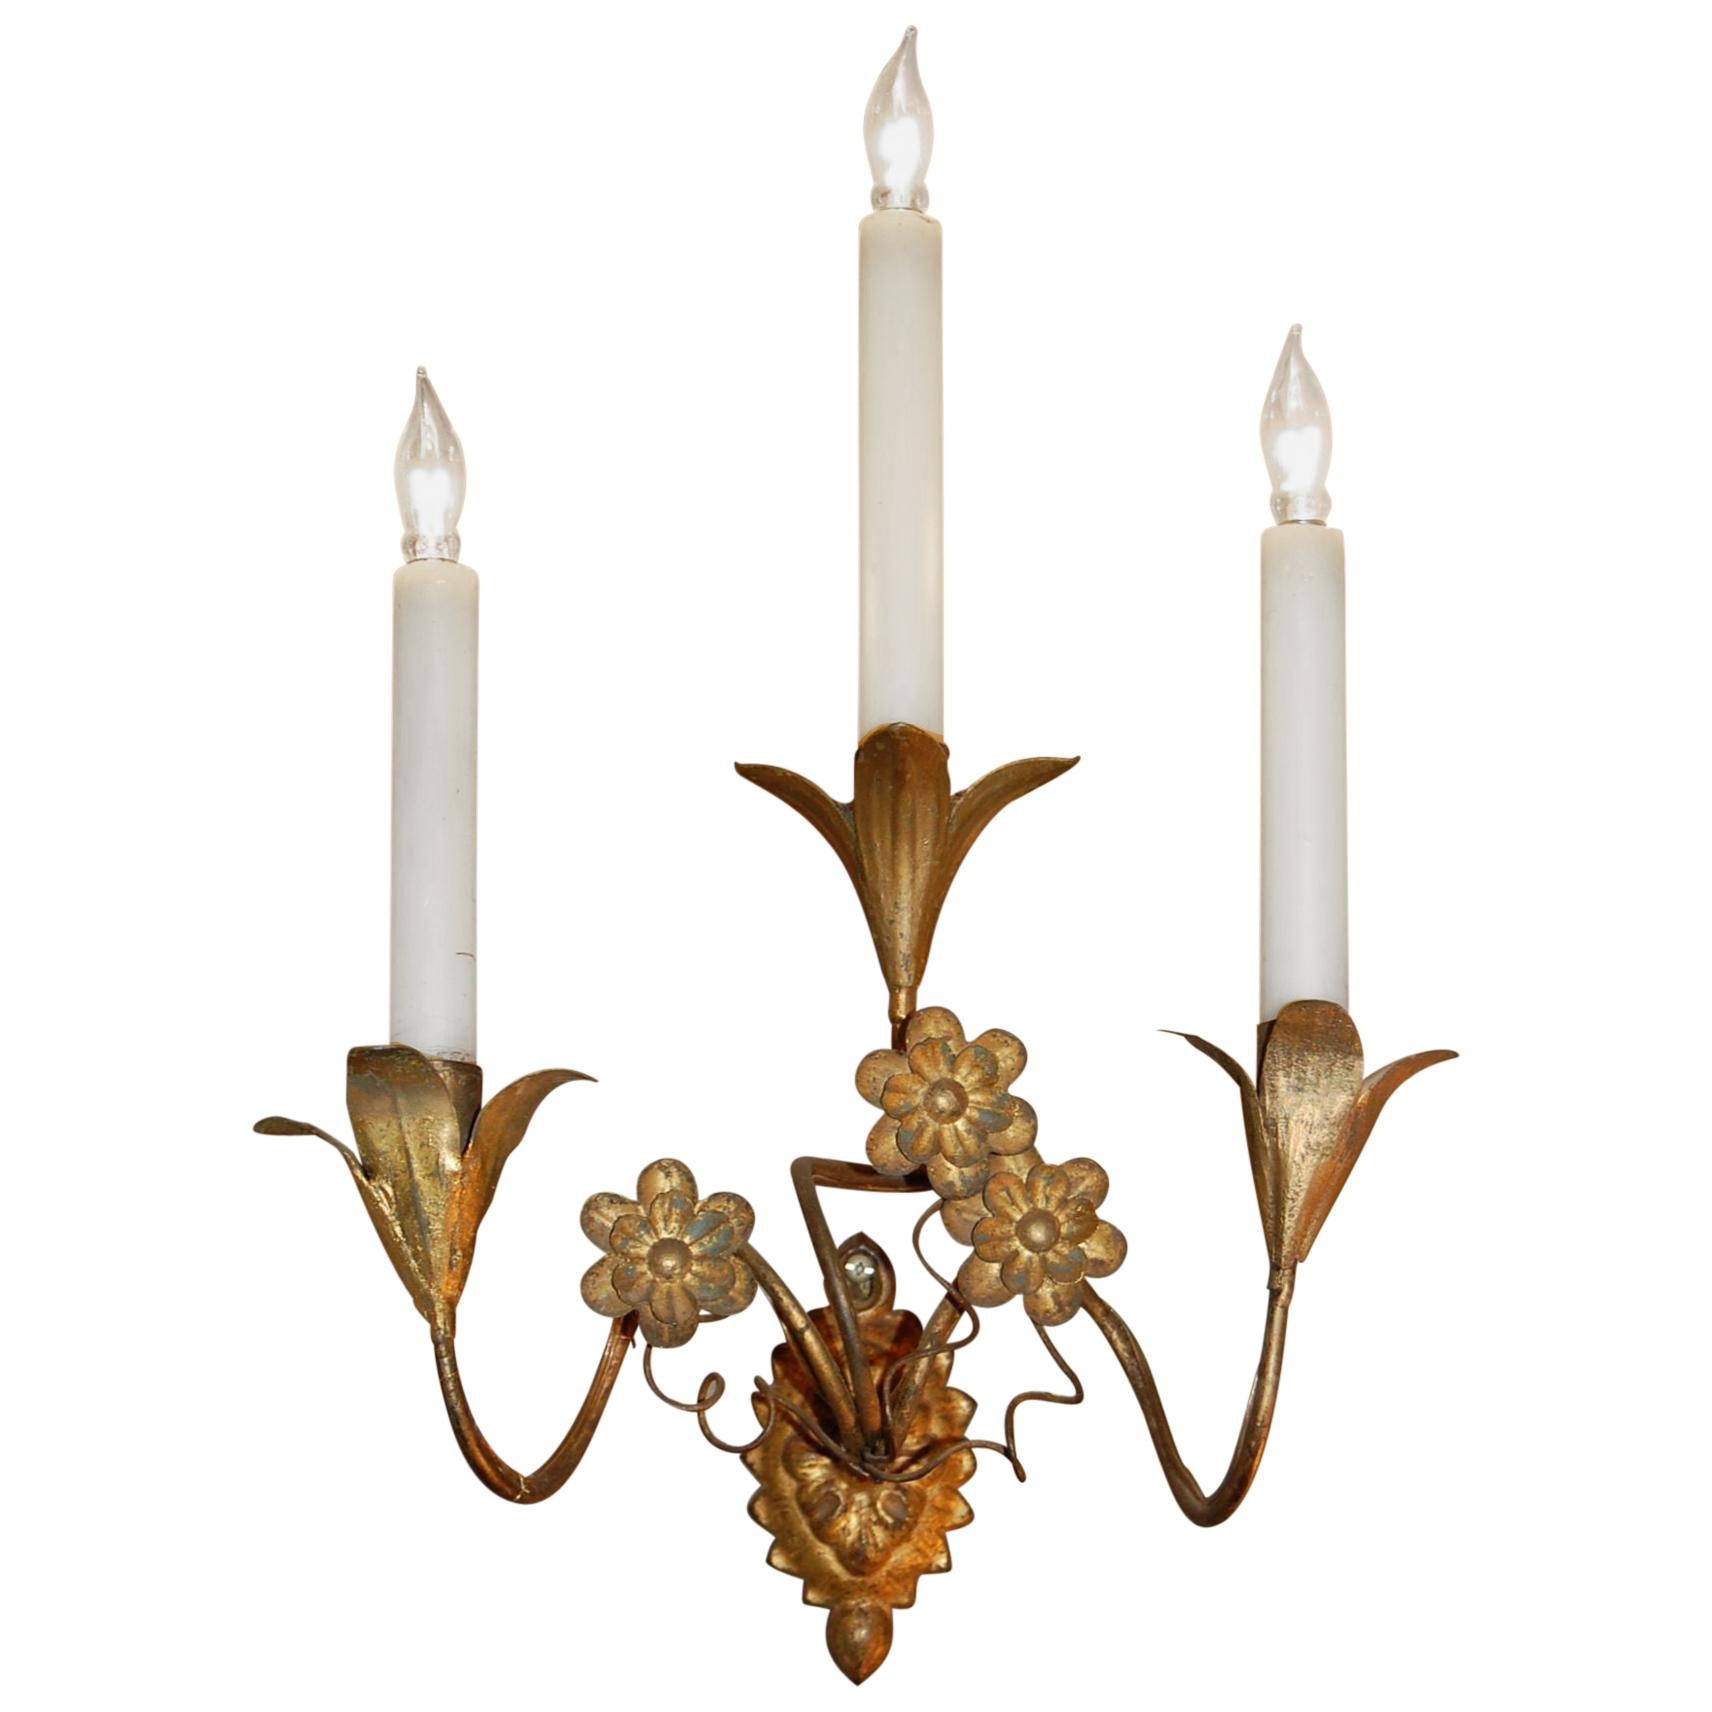 Pair of Gold Leaf Tole Three-Light Italian Wall Sconces, Early 19th Century